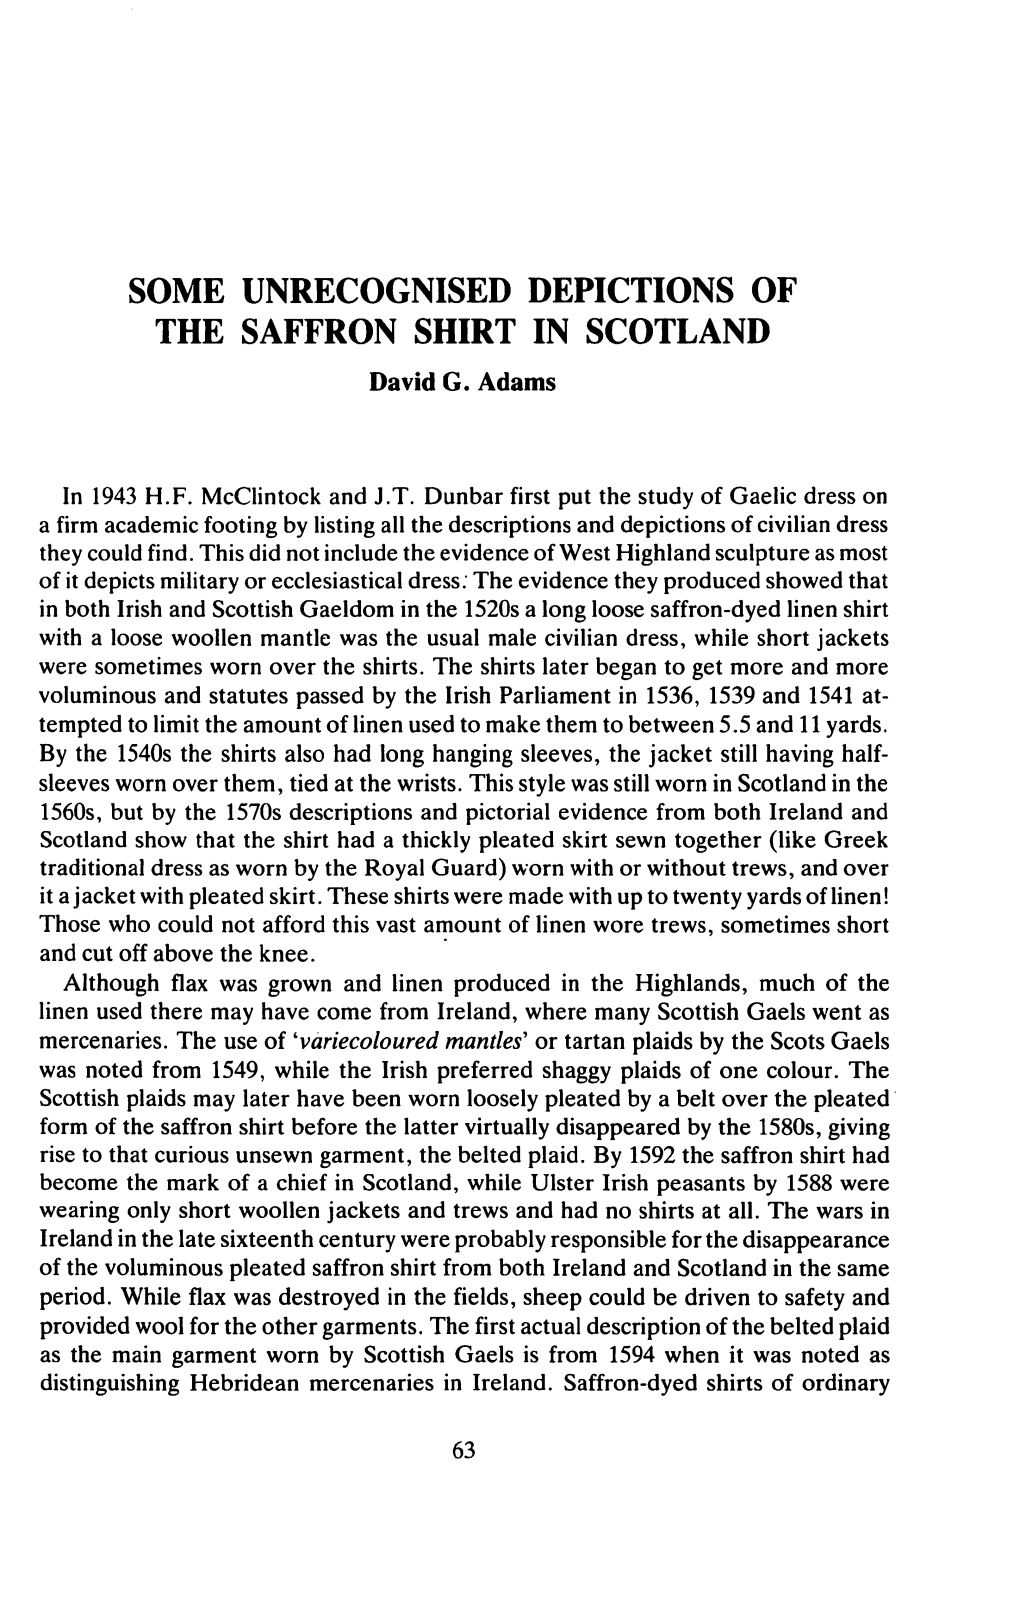 SOME UNRECOGNISED DEPICTIONS of the SAFFRON SHIRT in SCOTLAND David G